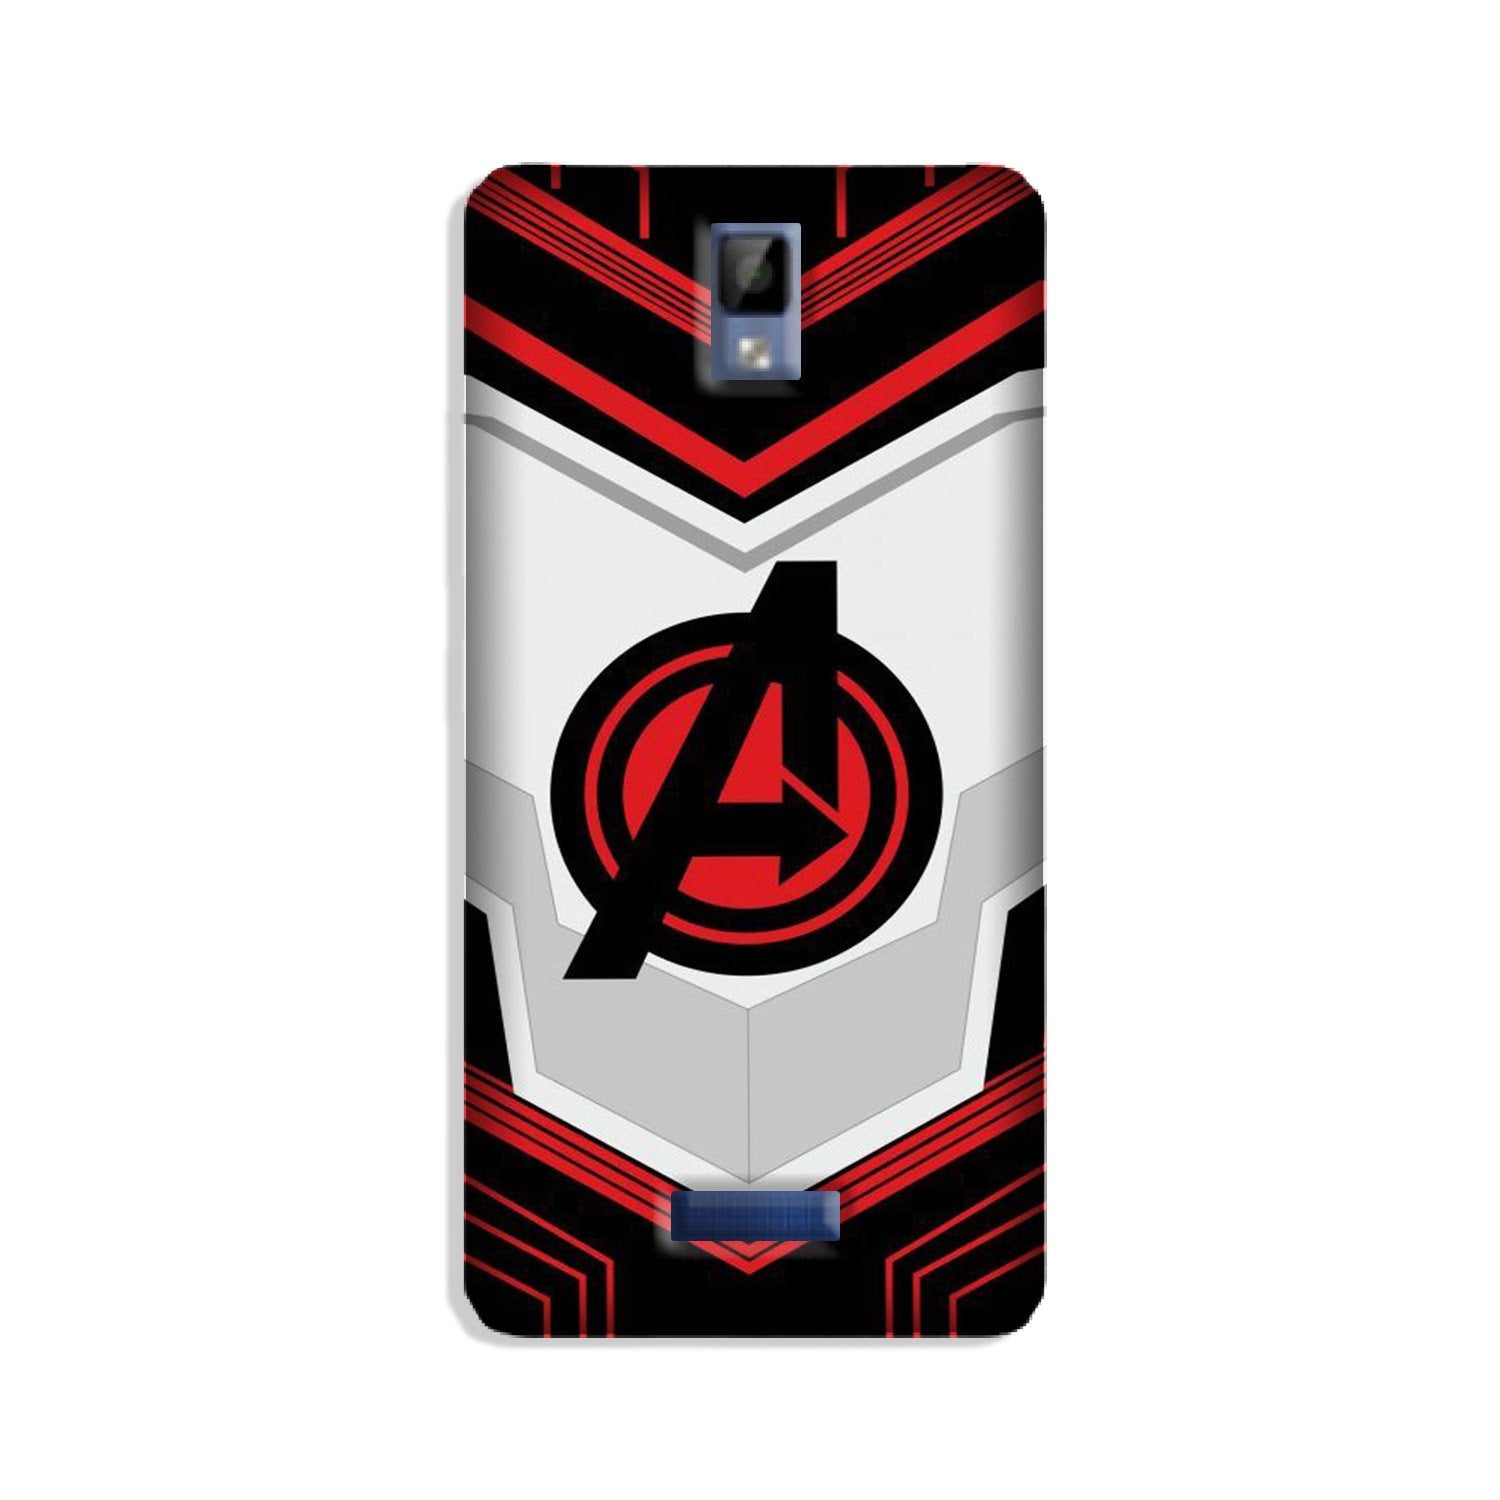 Avengers2 Case for Gionee P7 (Design No. 255)